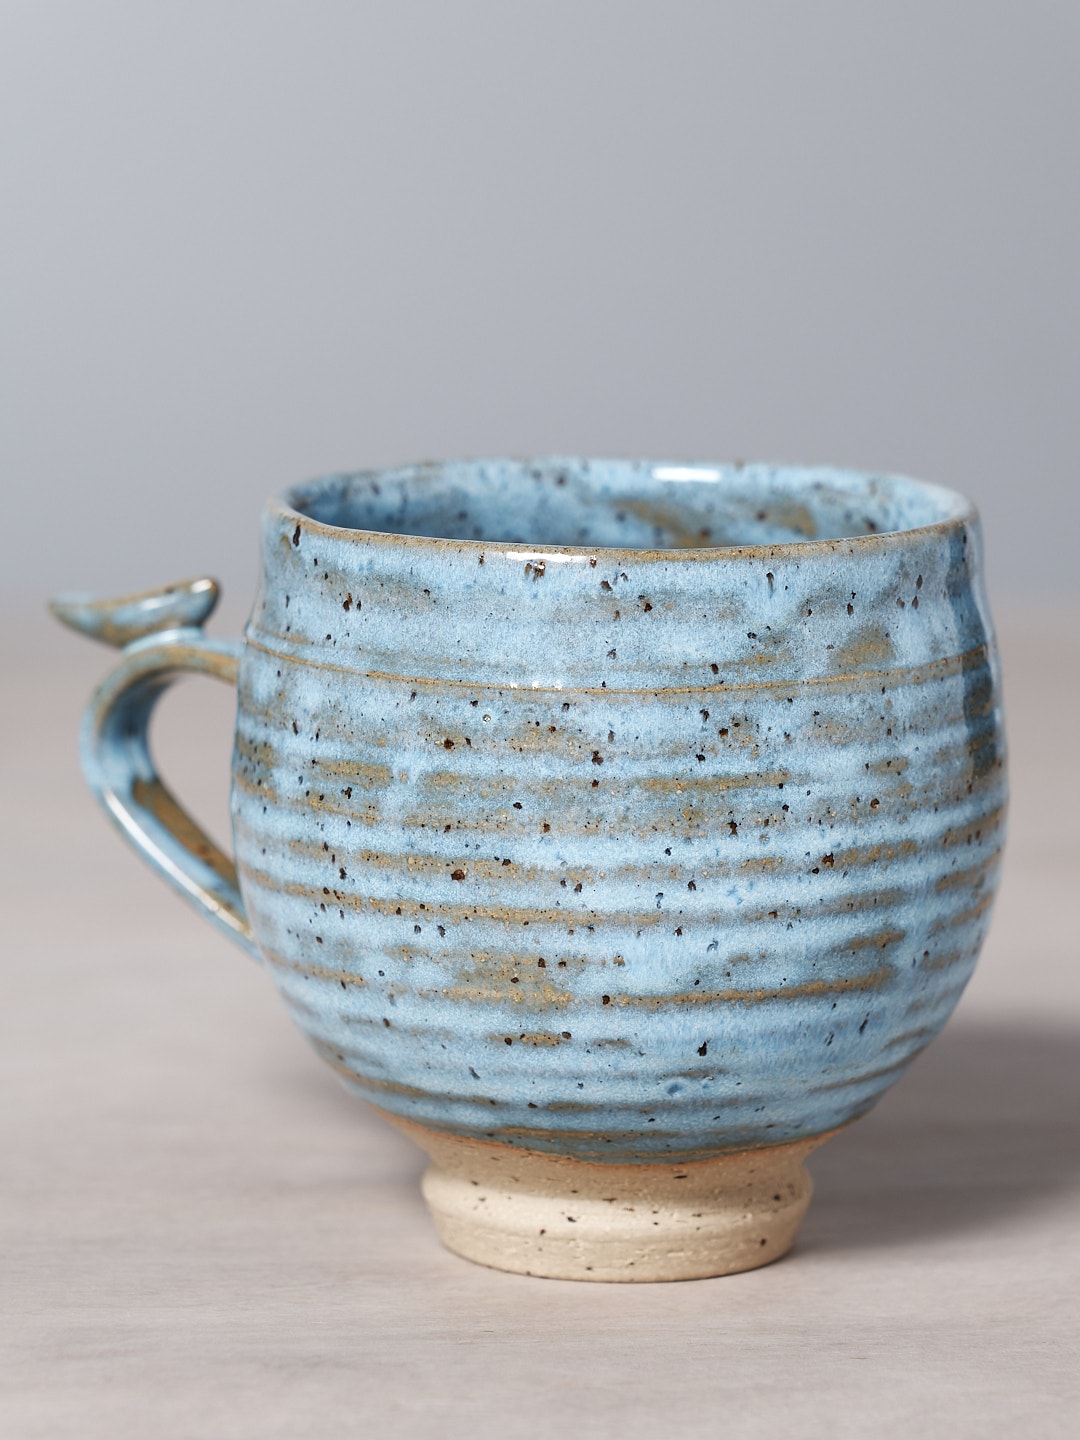 A Bird Handle Cup - Sky Blue by Jino Ceramic Studio placed on a wooden table.